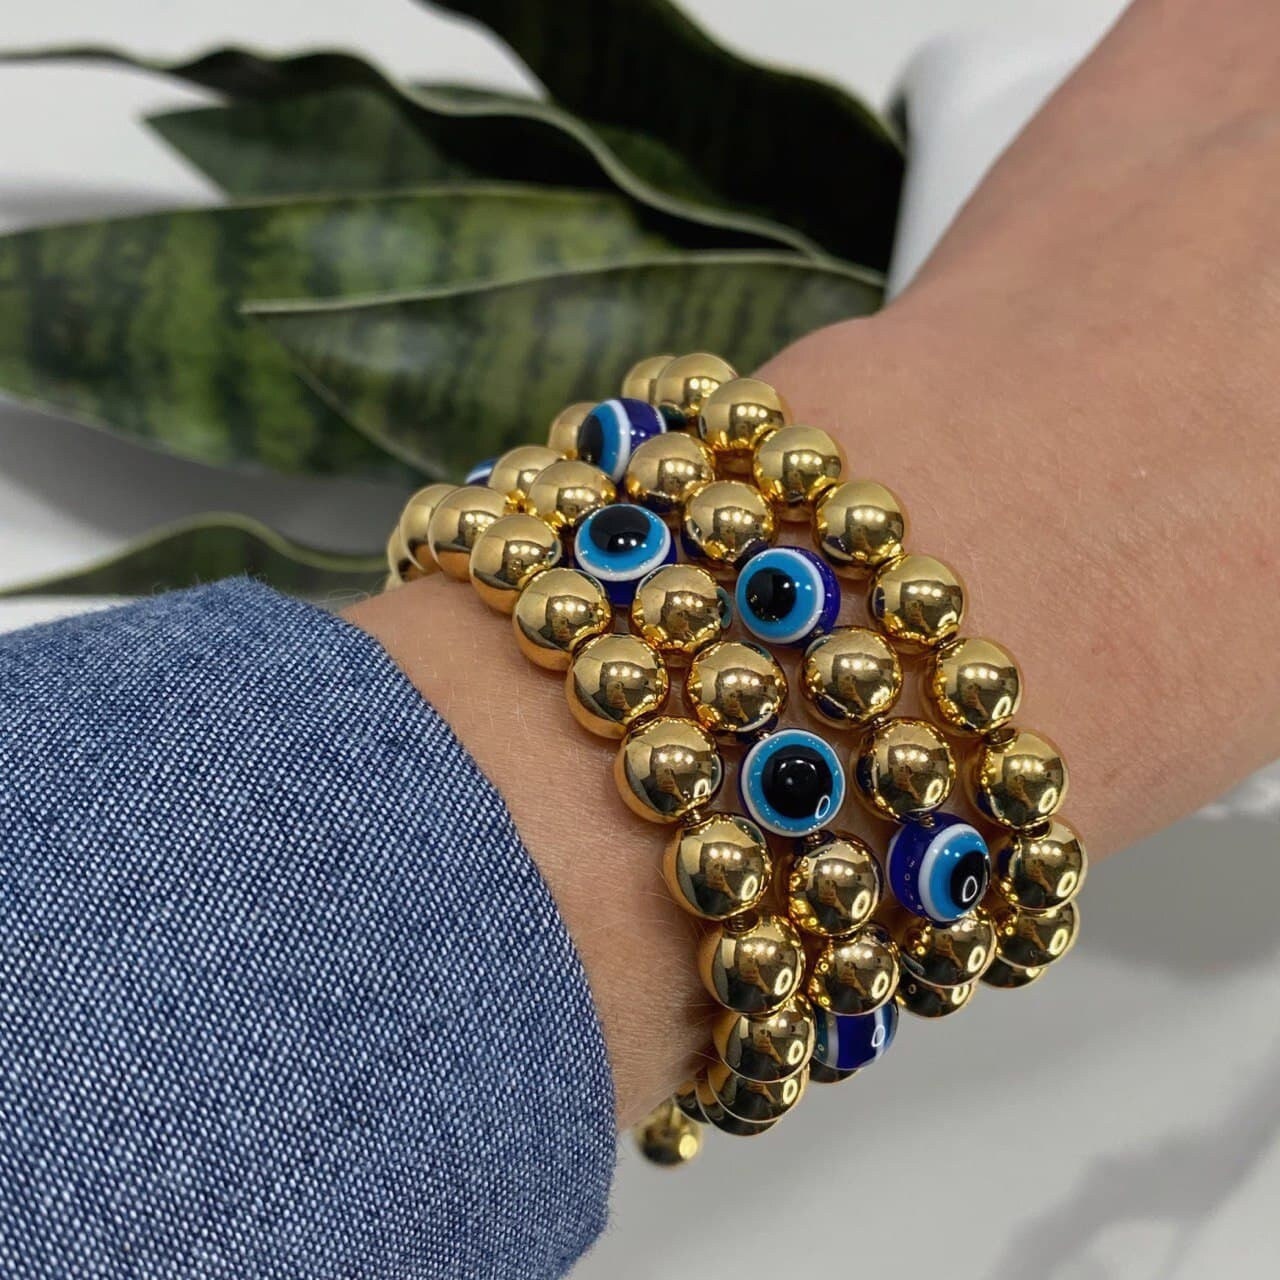 Adjustable 18k Gold Filled Bead Evil Eye Bracelet Featuring Slide Clasp And Glass Blue Evil Eye Ball Wholesale Jewelry Making Supplies